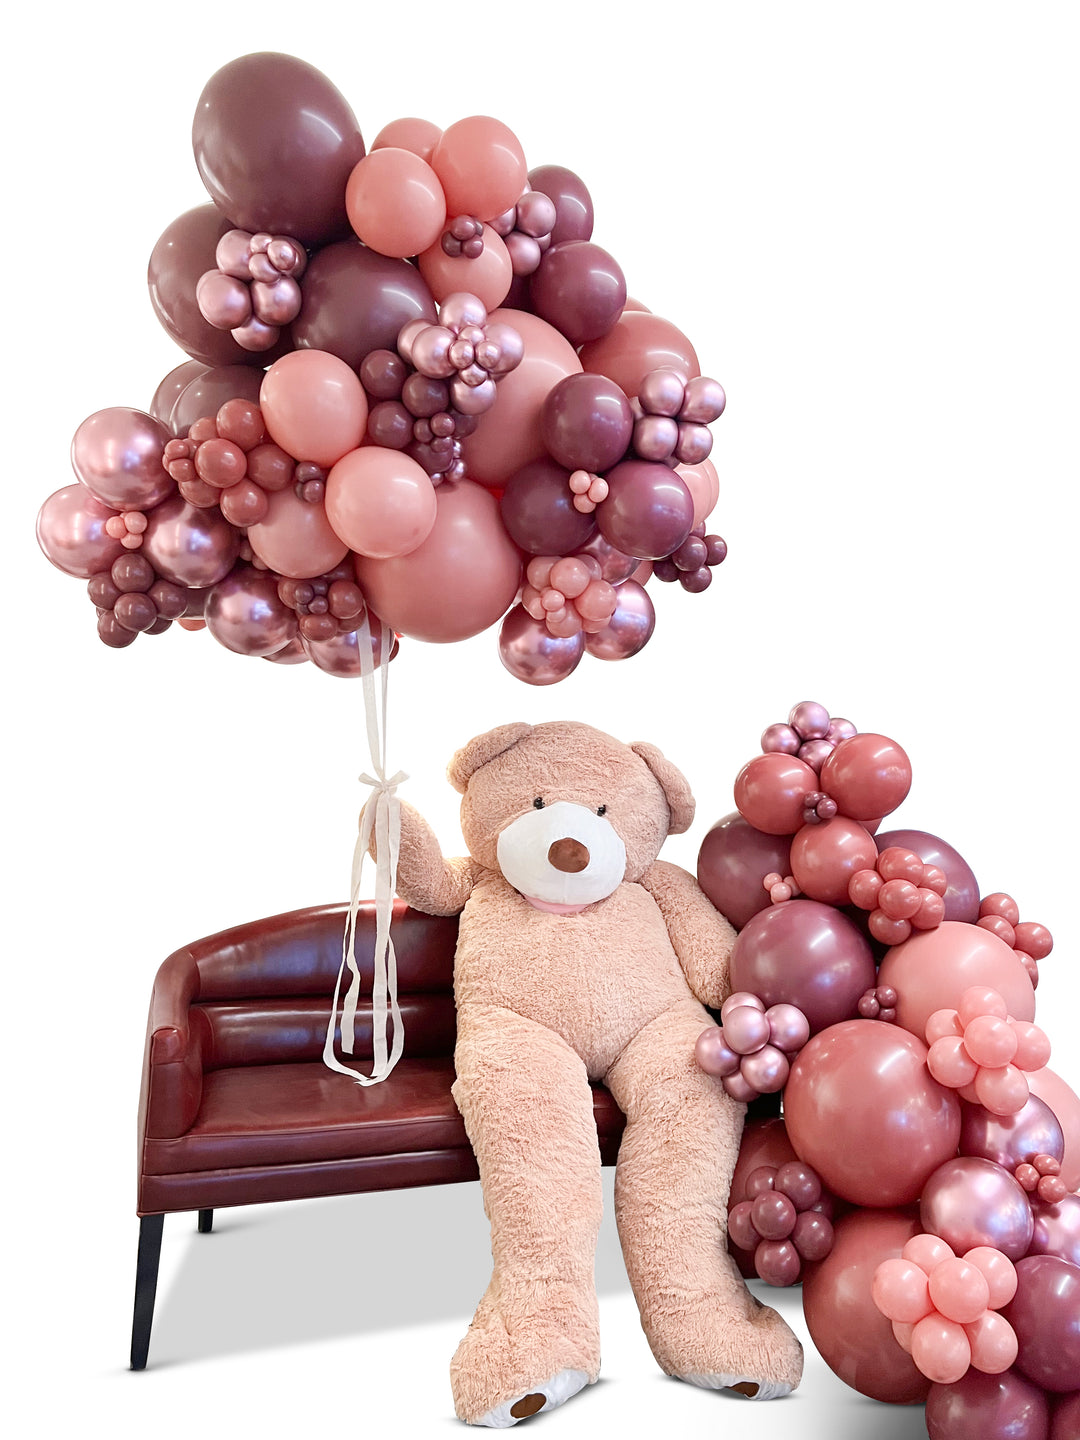 Giant Teddy Bear Rental (balloons not included)